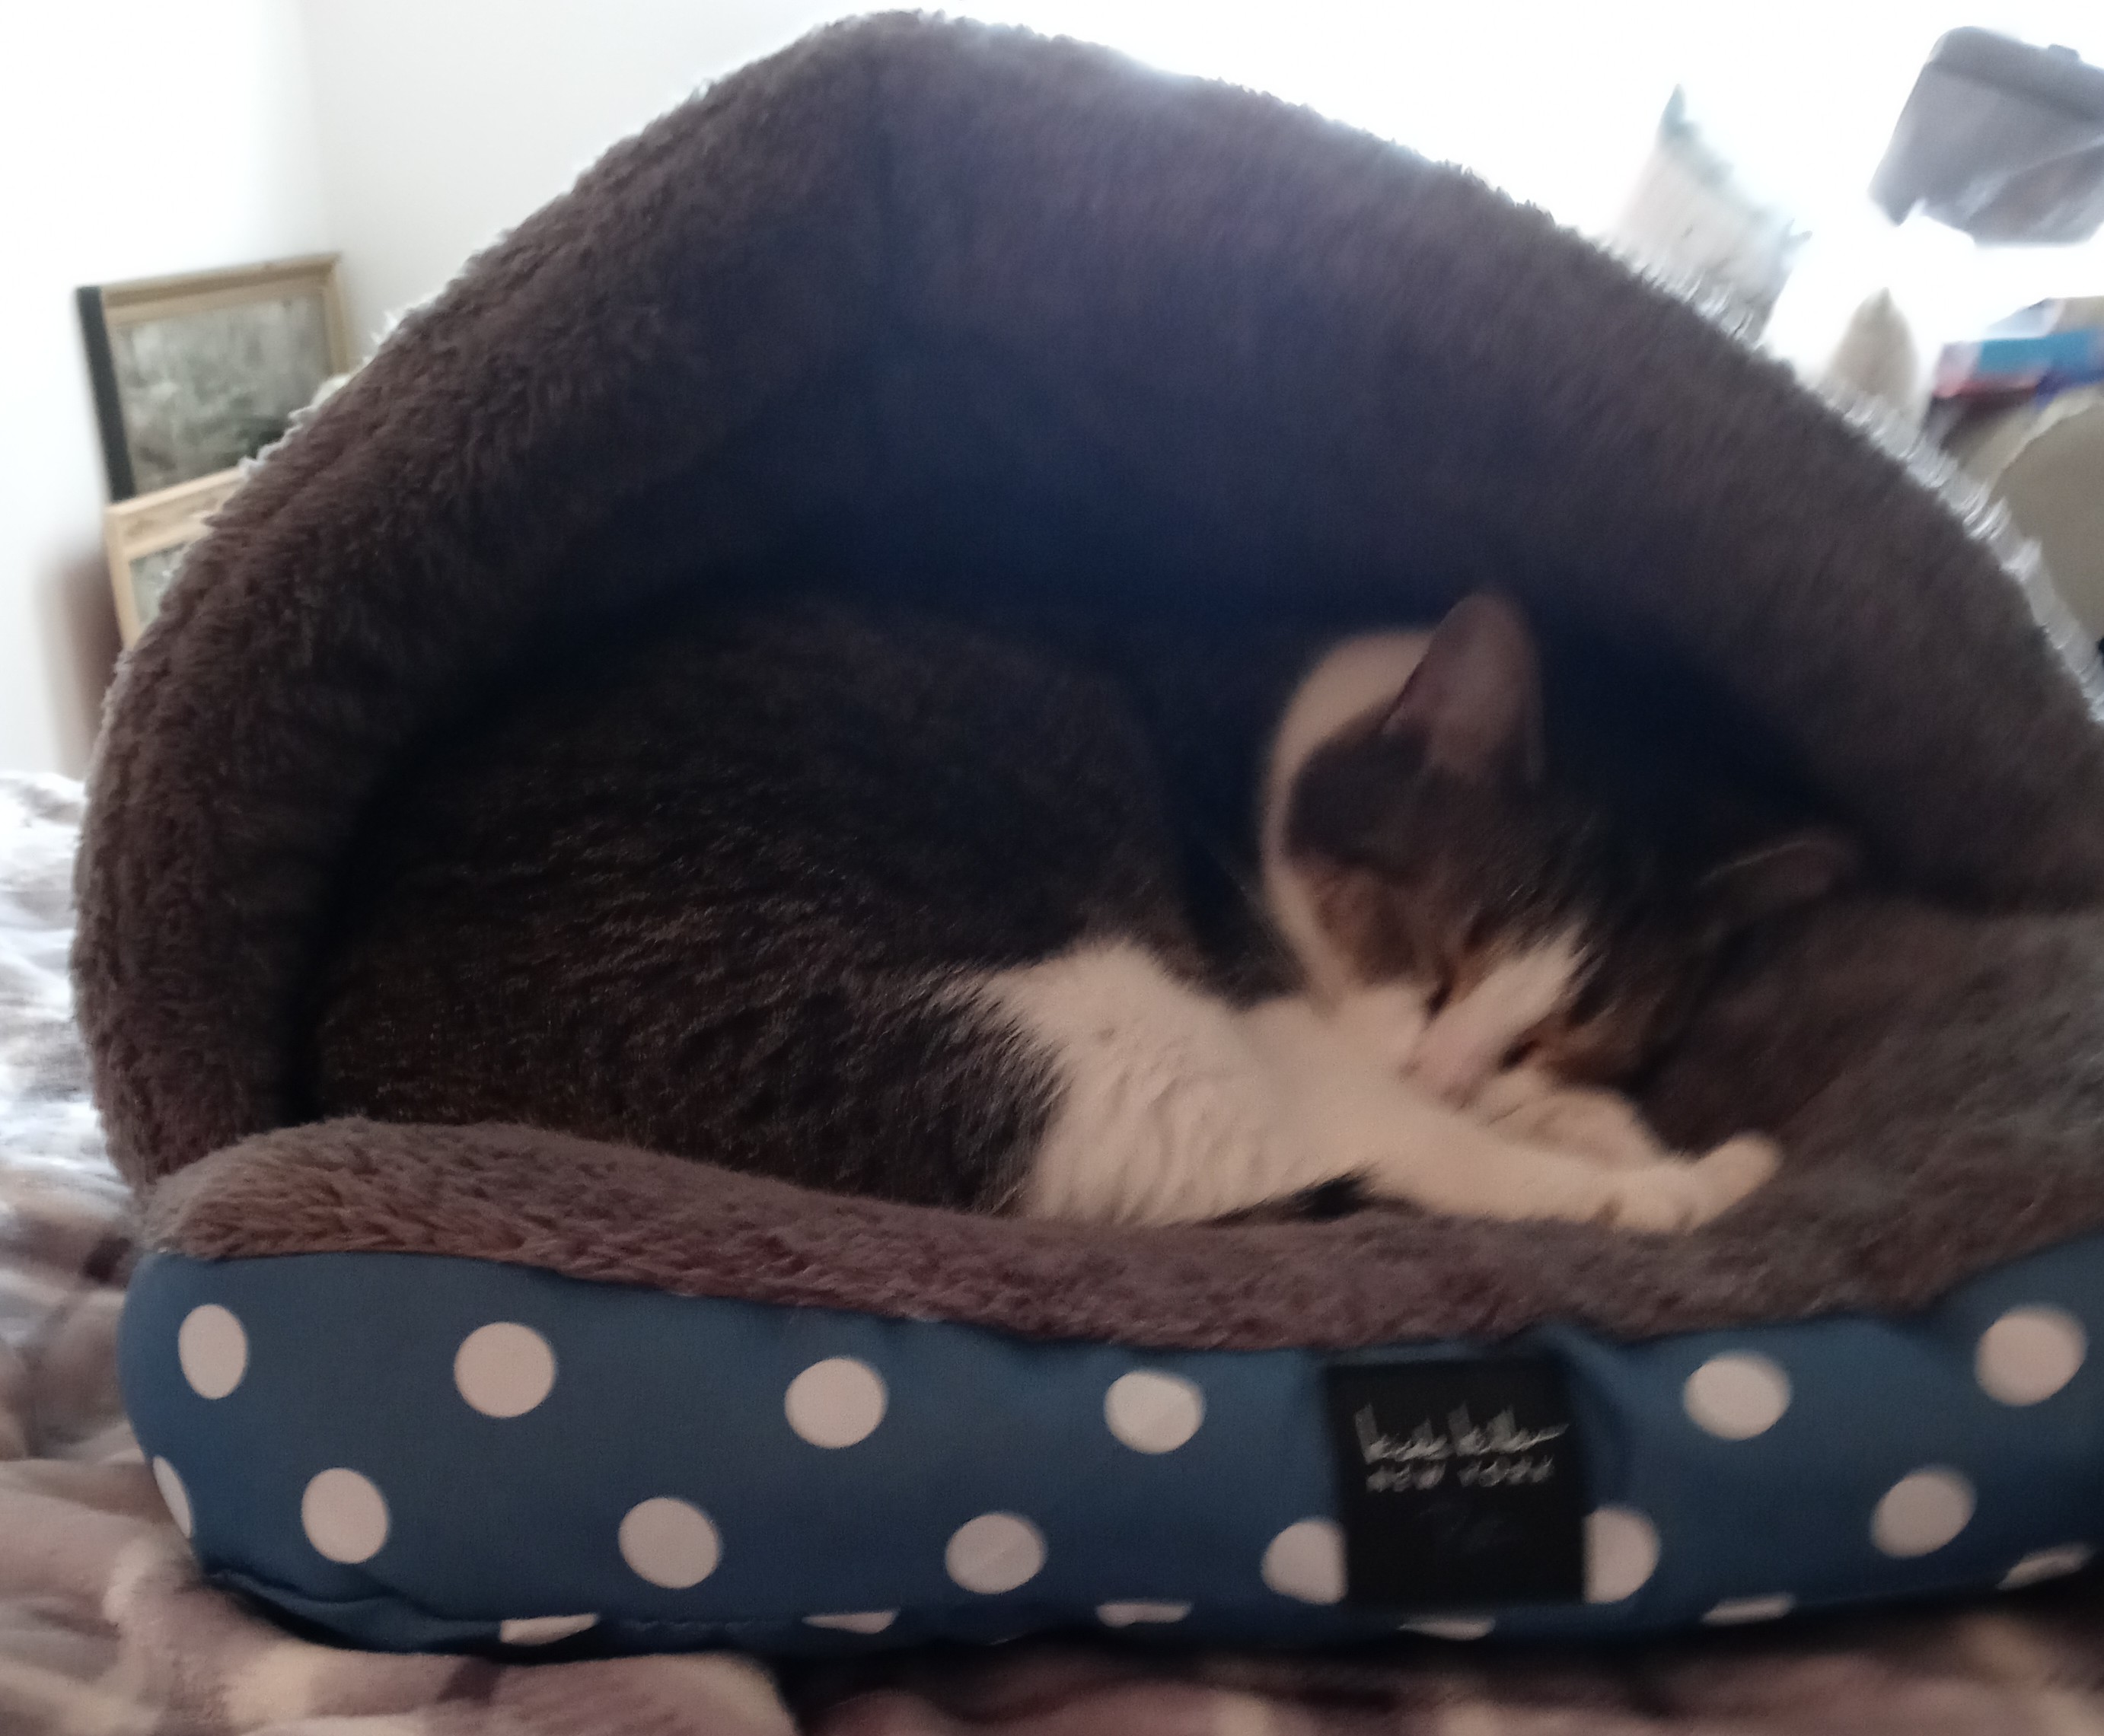 Apollo in his Bed-my photo